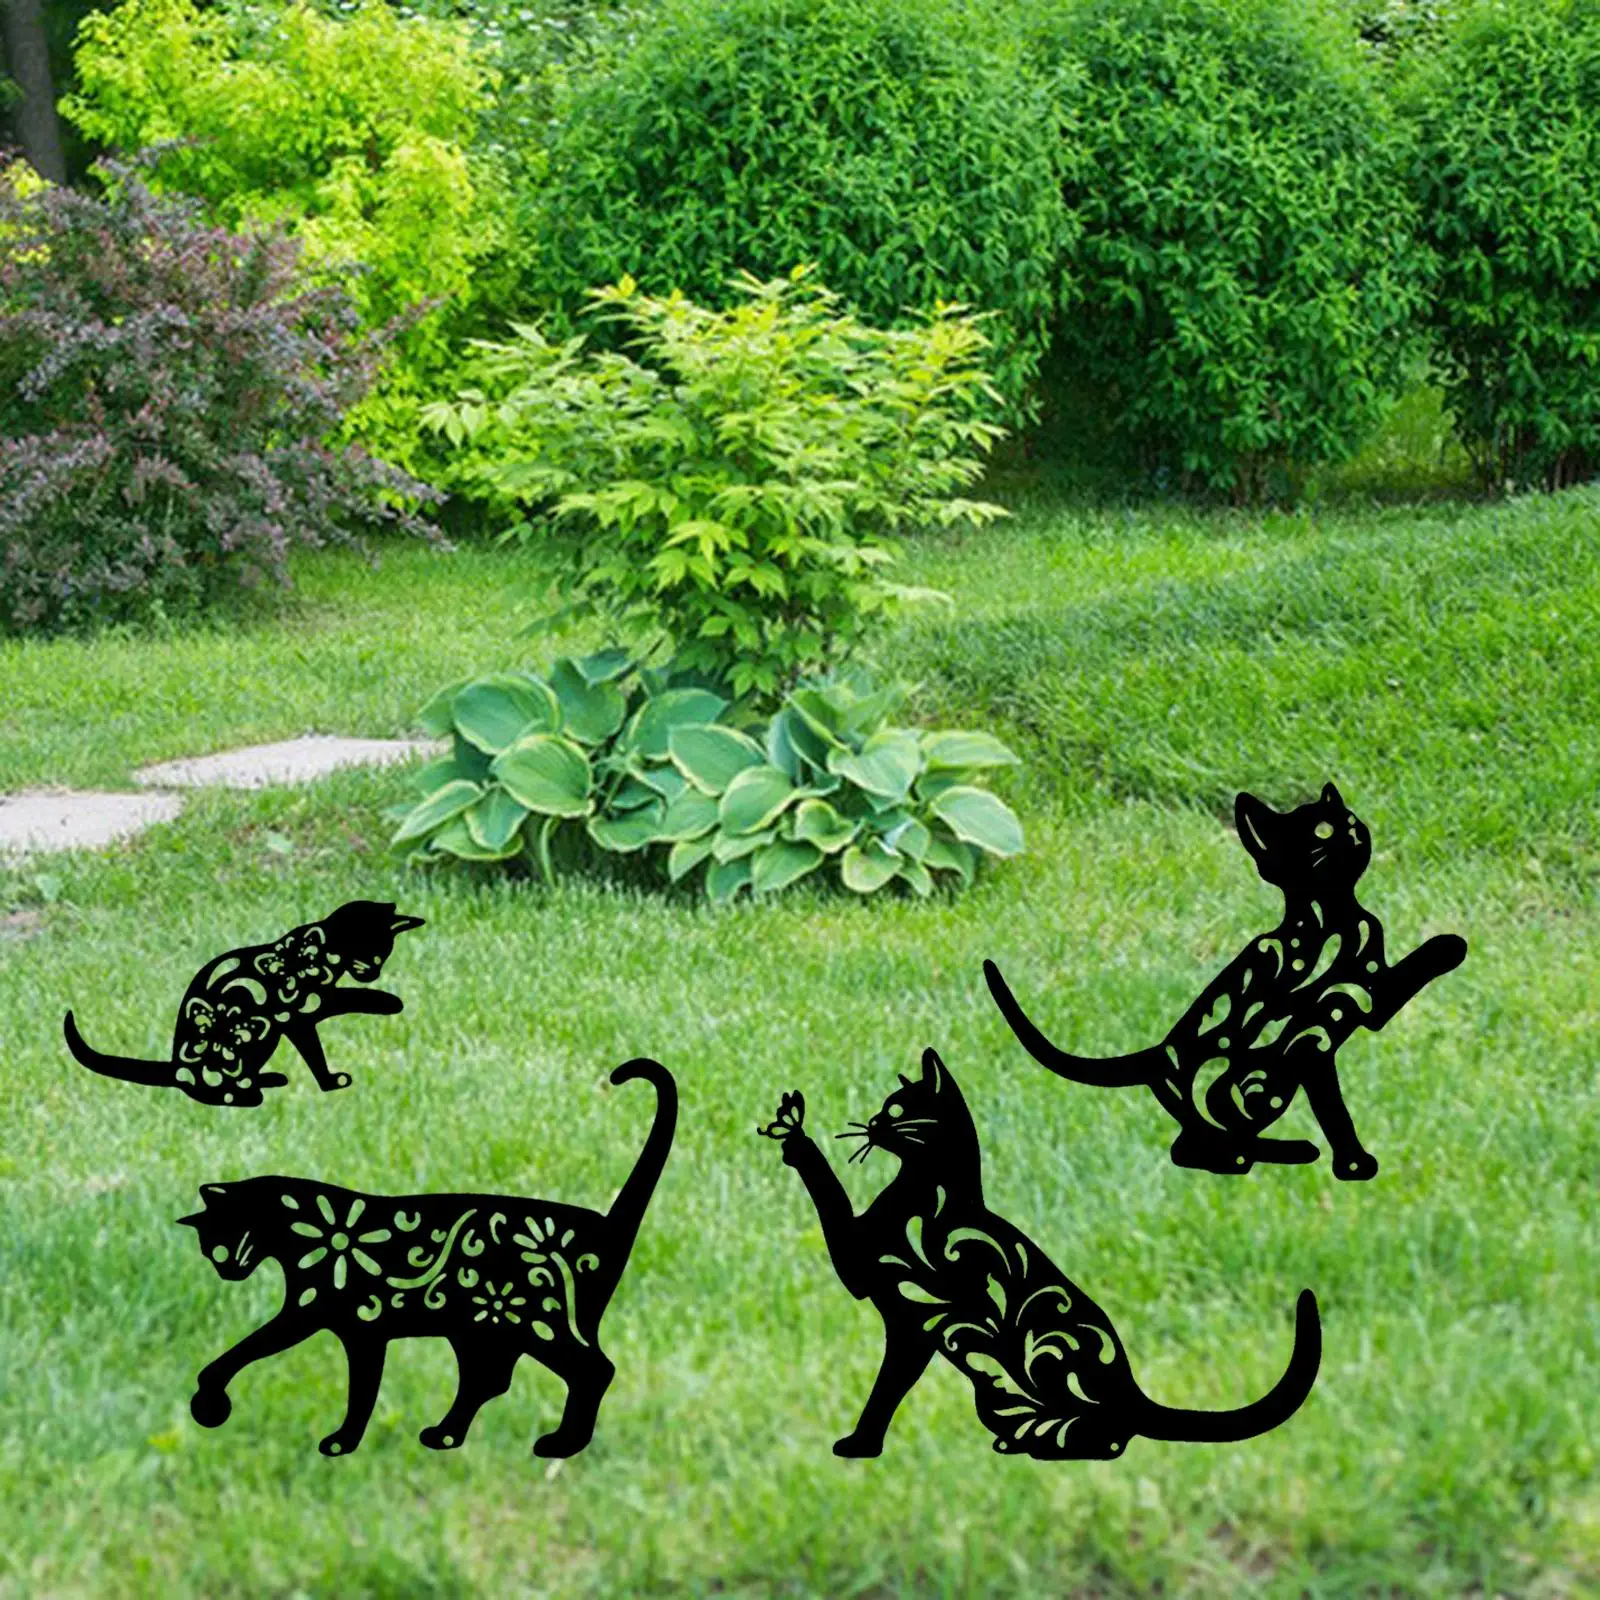 Cat Garden Metal Stakes Silhouette Stake Decorative Yard Sign Lawn Stakes for Party Lawn Patio Yard Decor